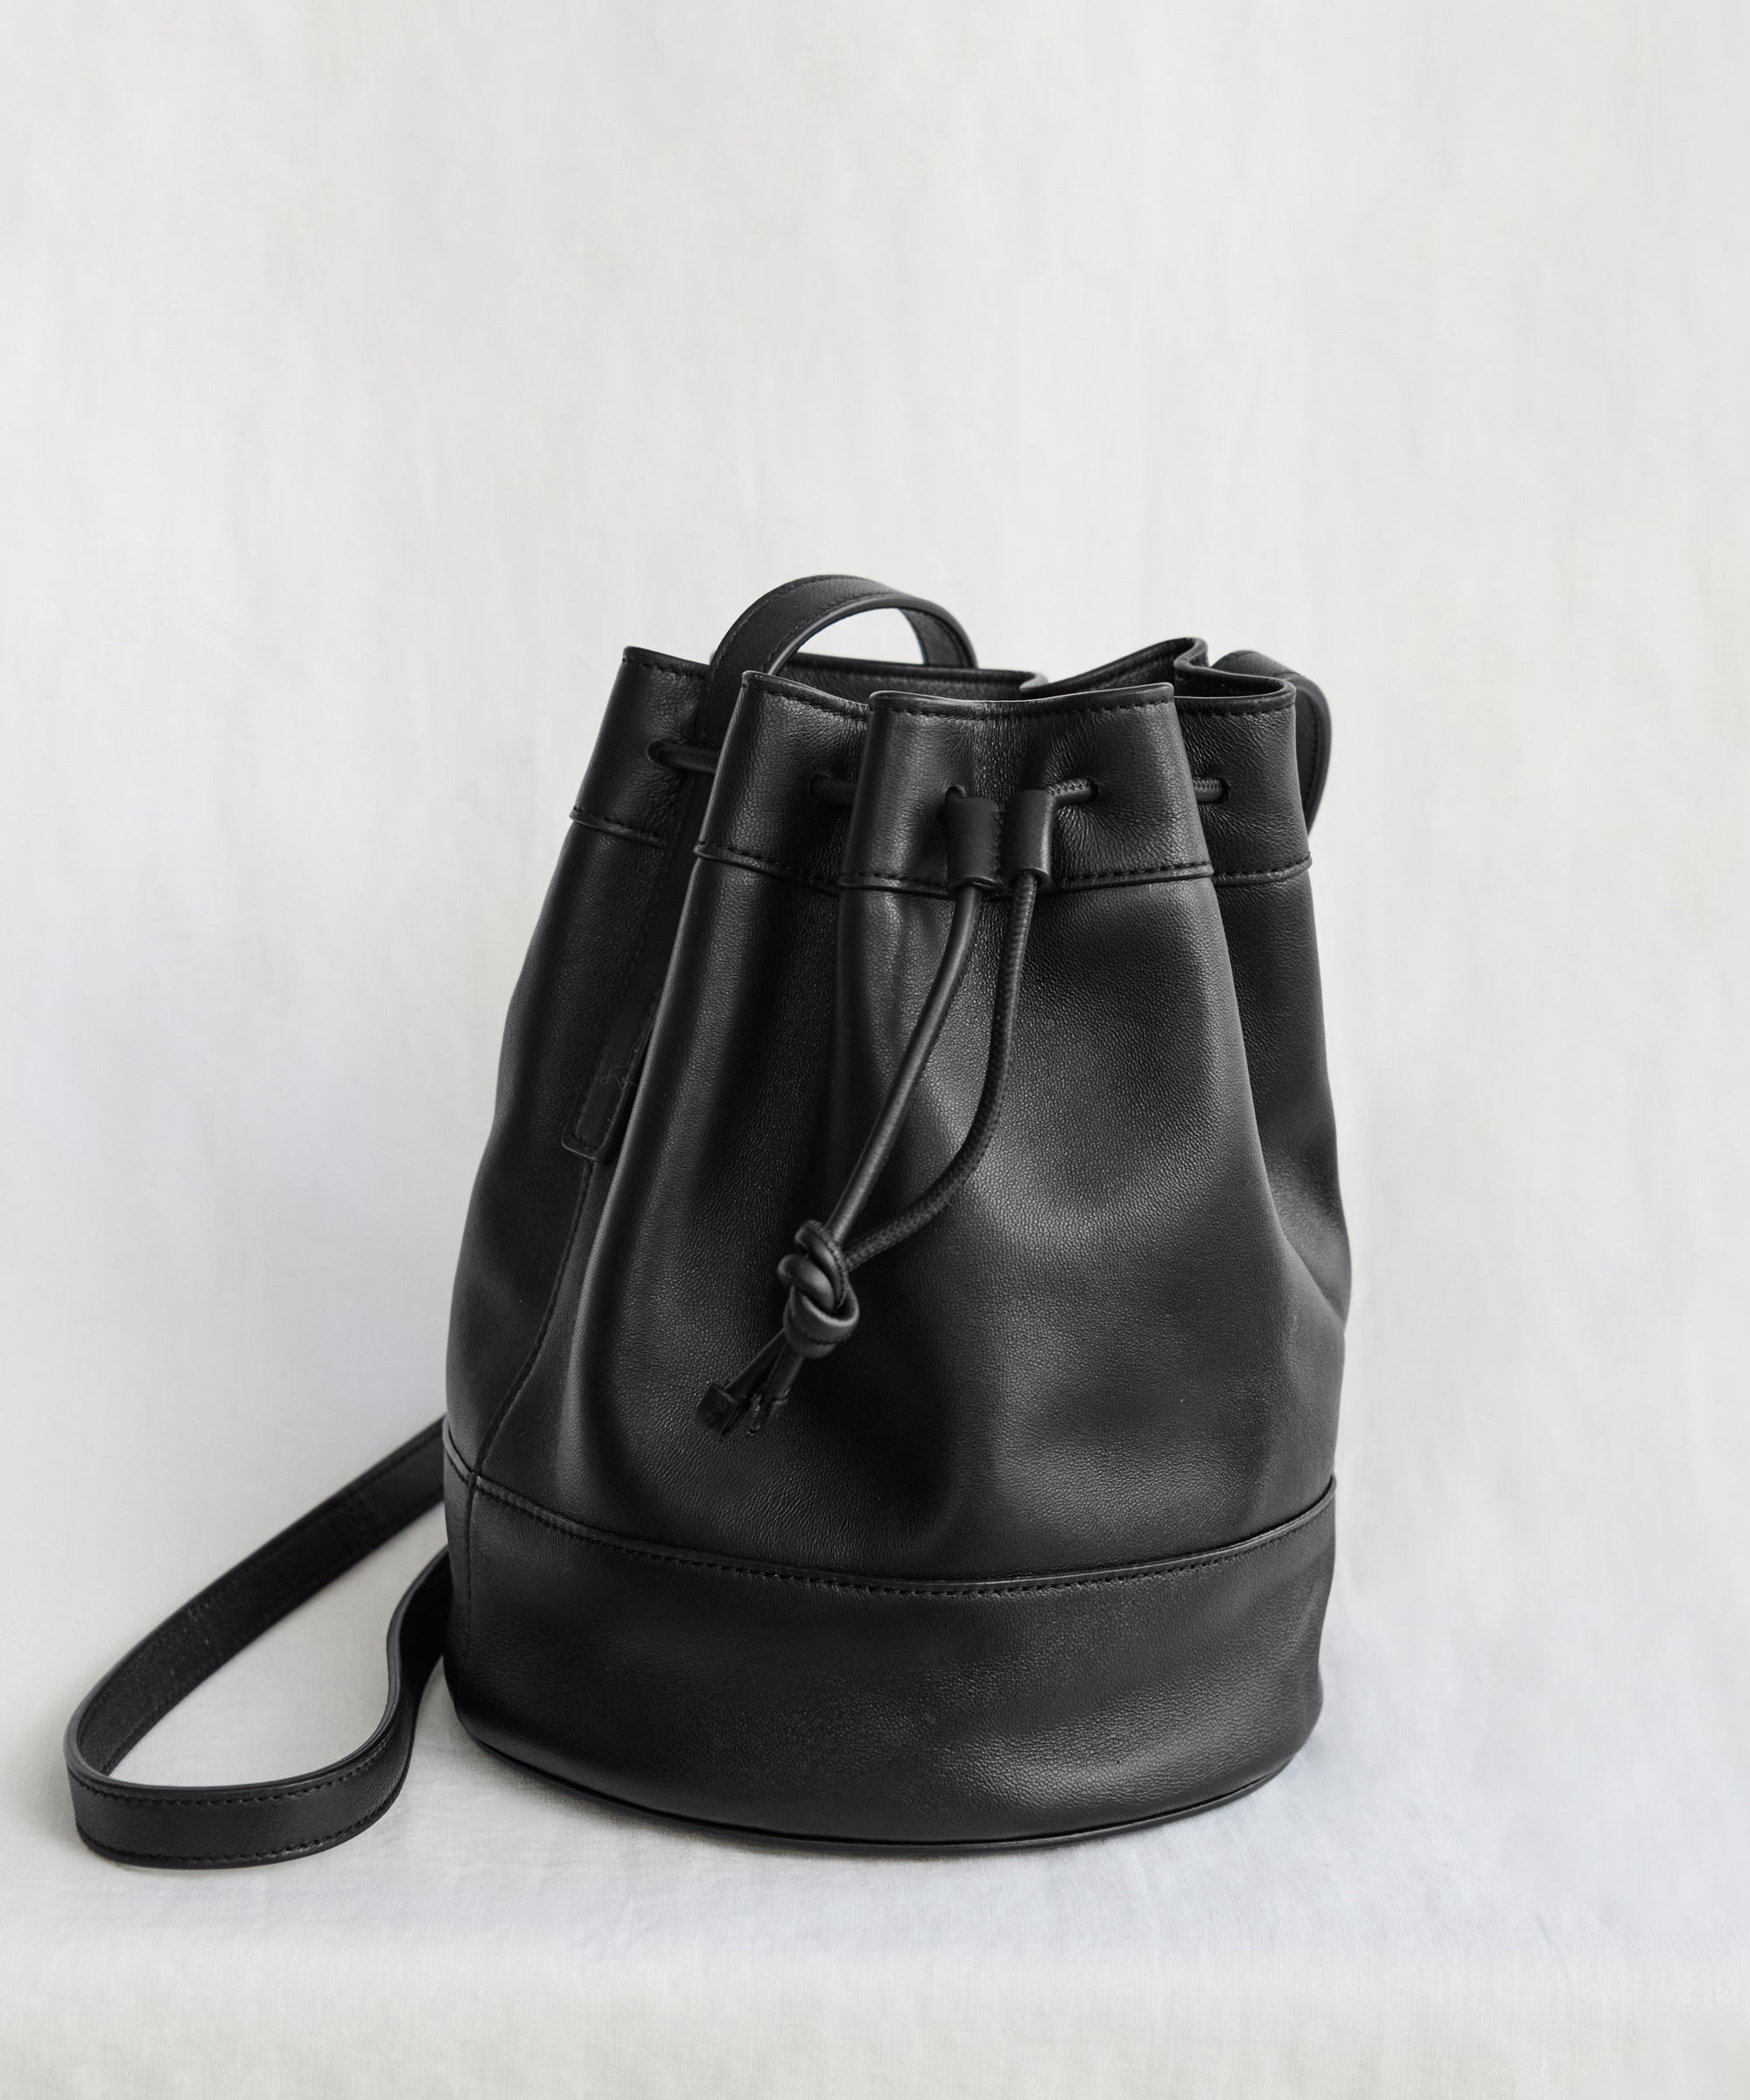 Soft Leather Women's Drawstring Backpack, Handmade Leather